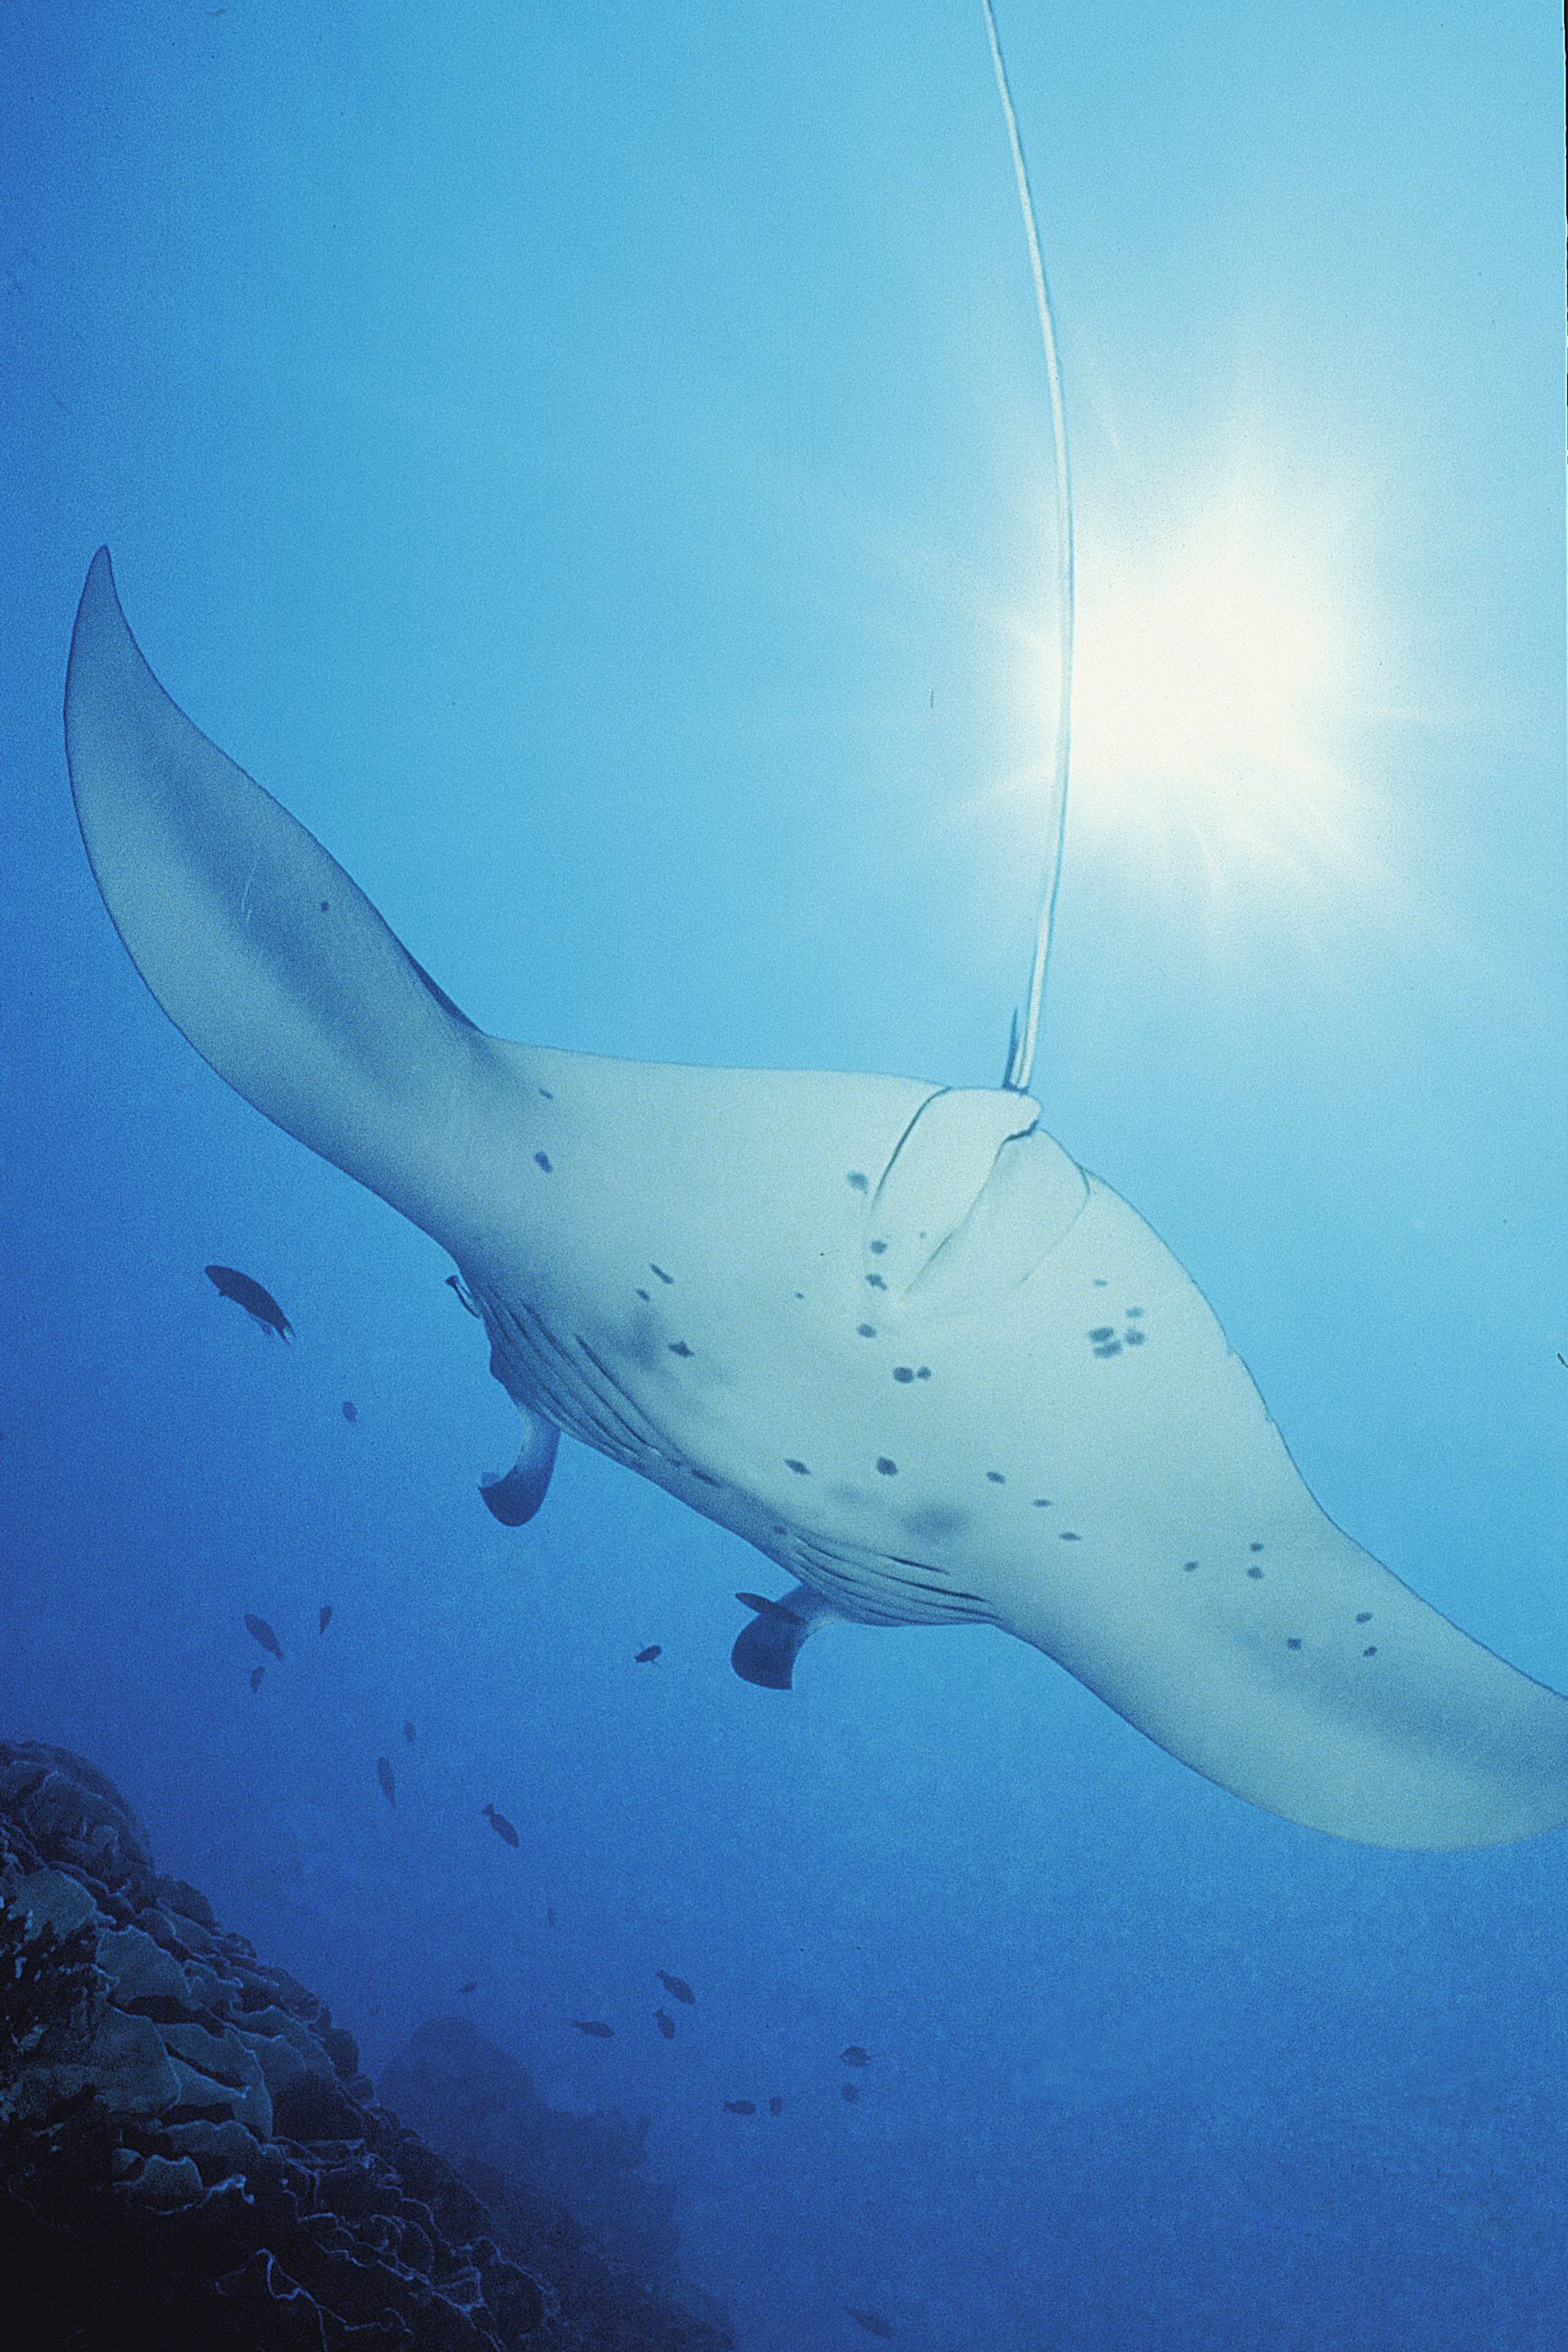 Manta at Merry-Go-Round, Valley of the Rays, Yap